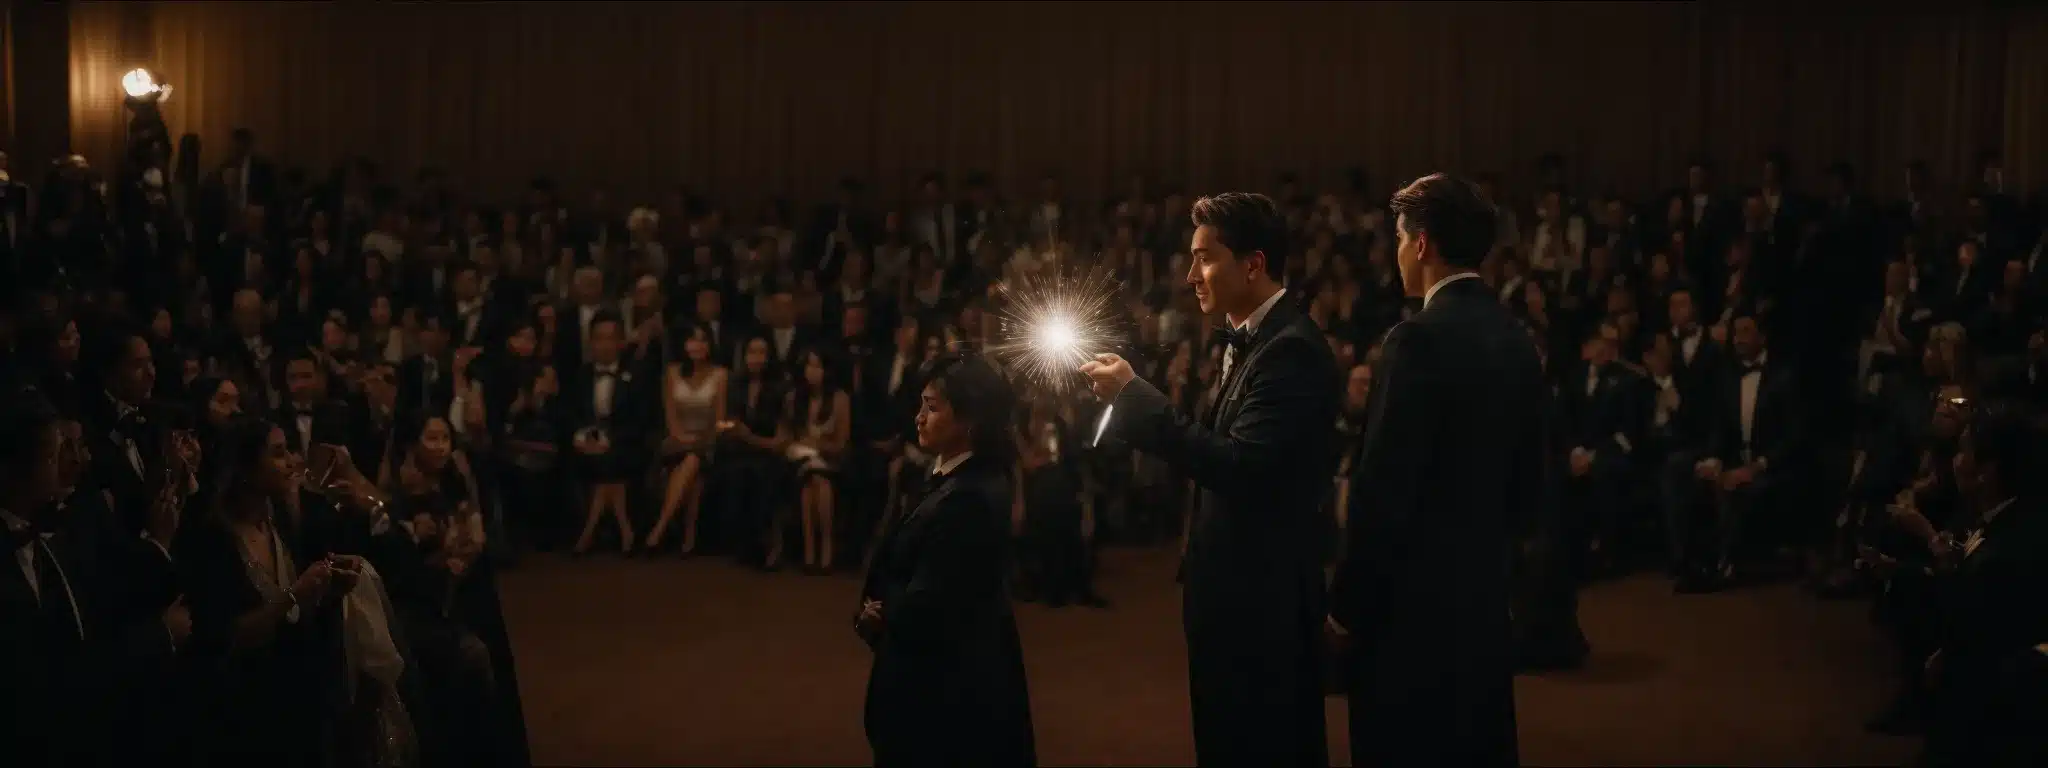 A Magician With A Wand Casting A Light Over A Visibly Enchanted Audience, Symbolizing The Captivating Allure Of Ppc Retargeting.